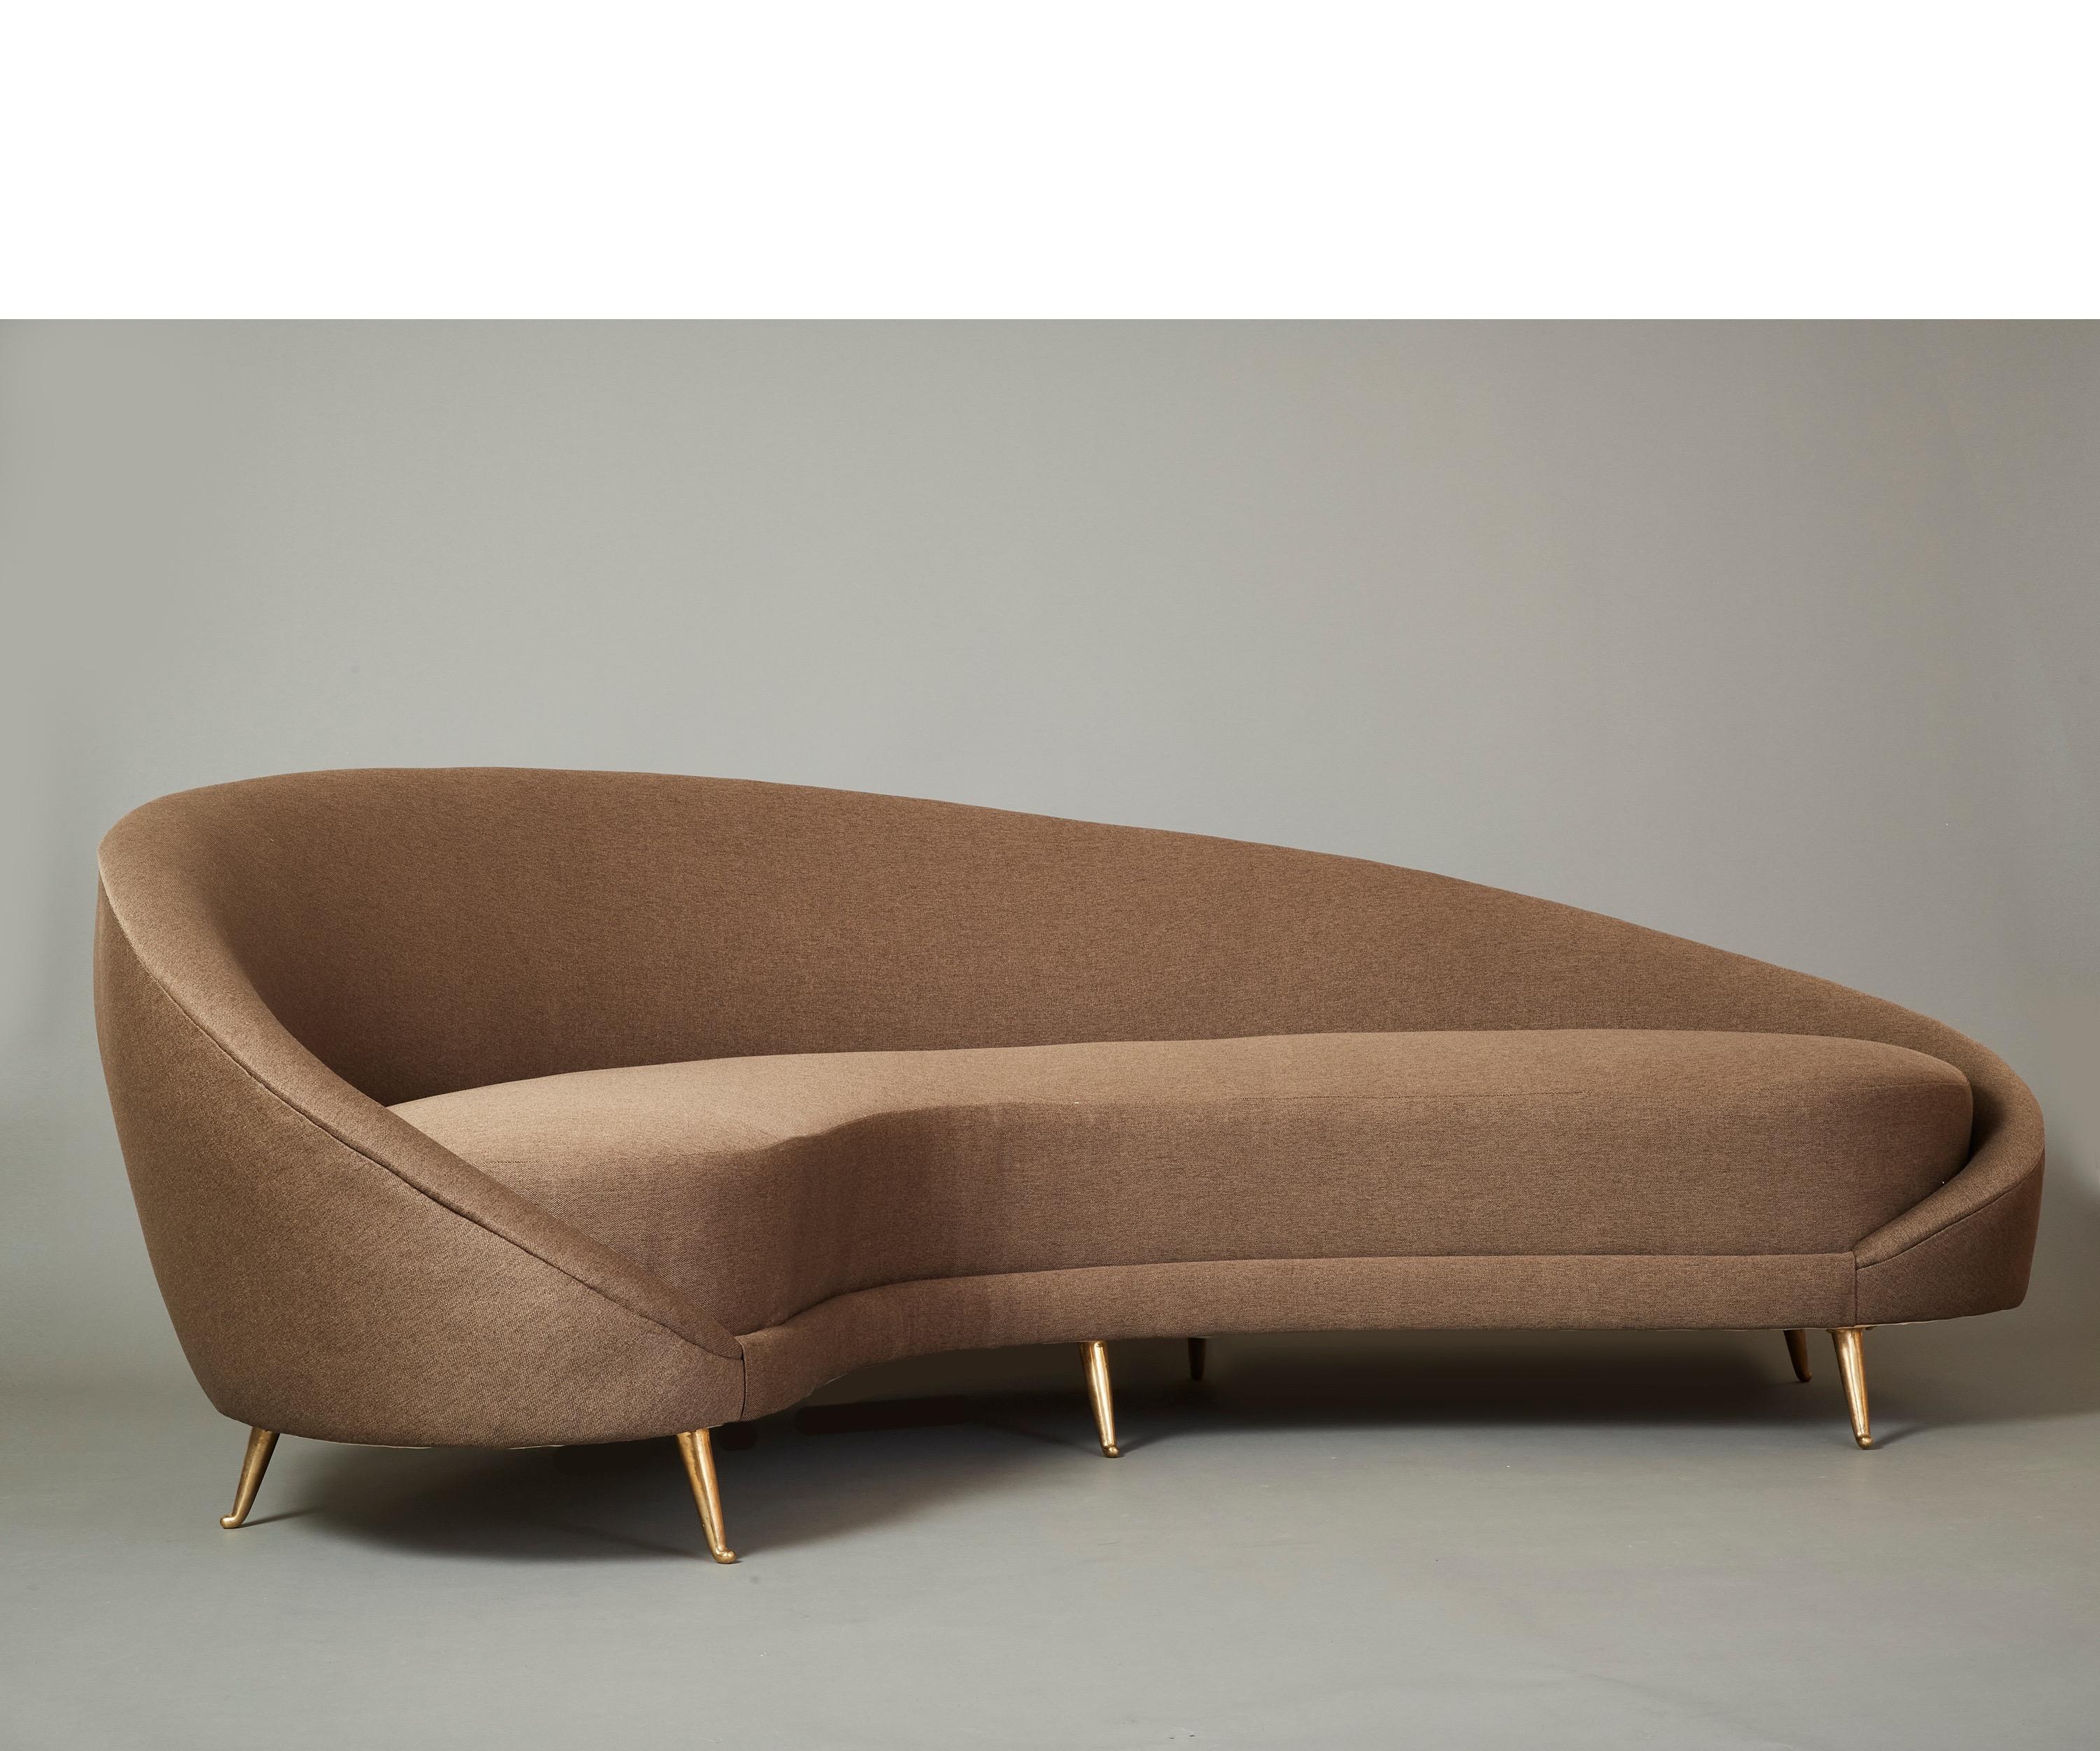 Federico Munari 

A beautifully elongated kidney-shaped sofa by Federico Munari, with serpentine curves. The deep, highly comfortable seat, gracefully sloping back, and tapered arms are raised on handsomely modeled polished brass legs that culminate